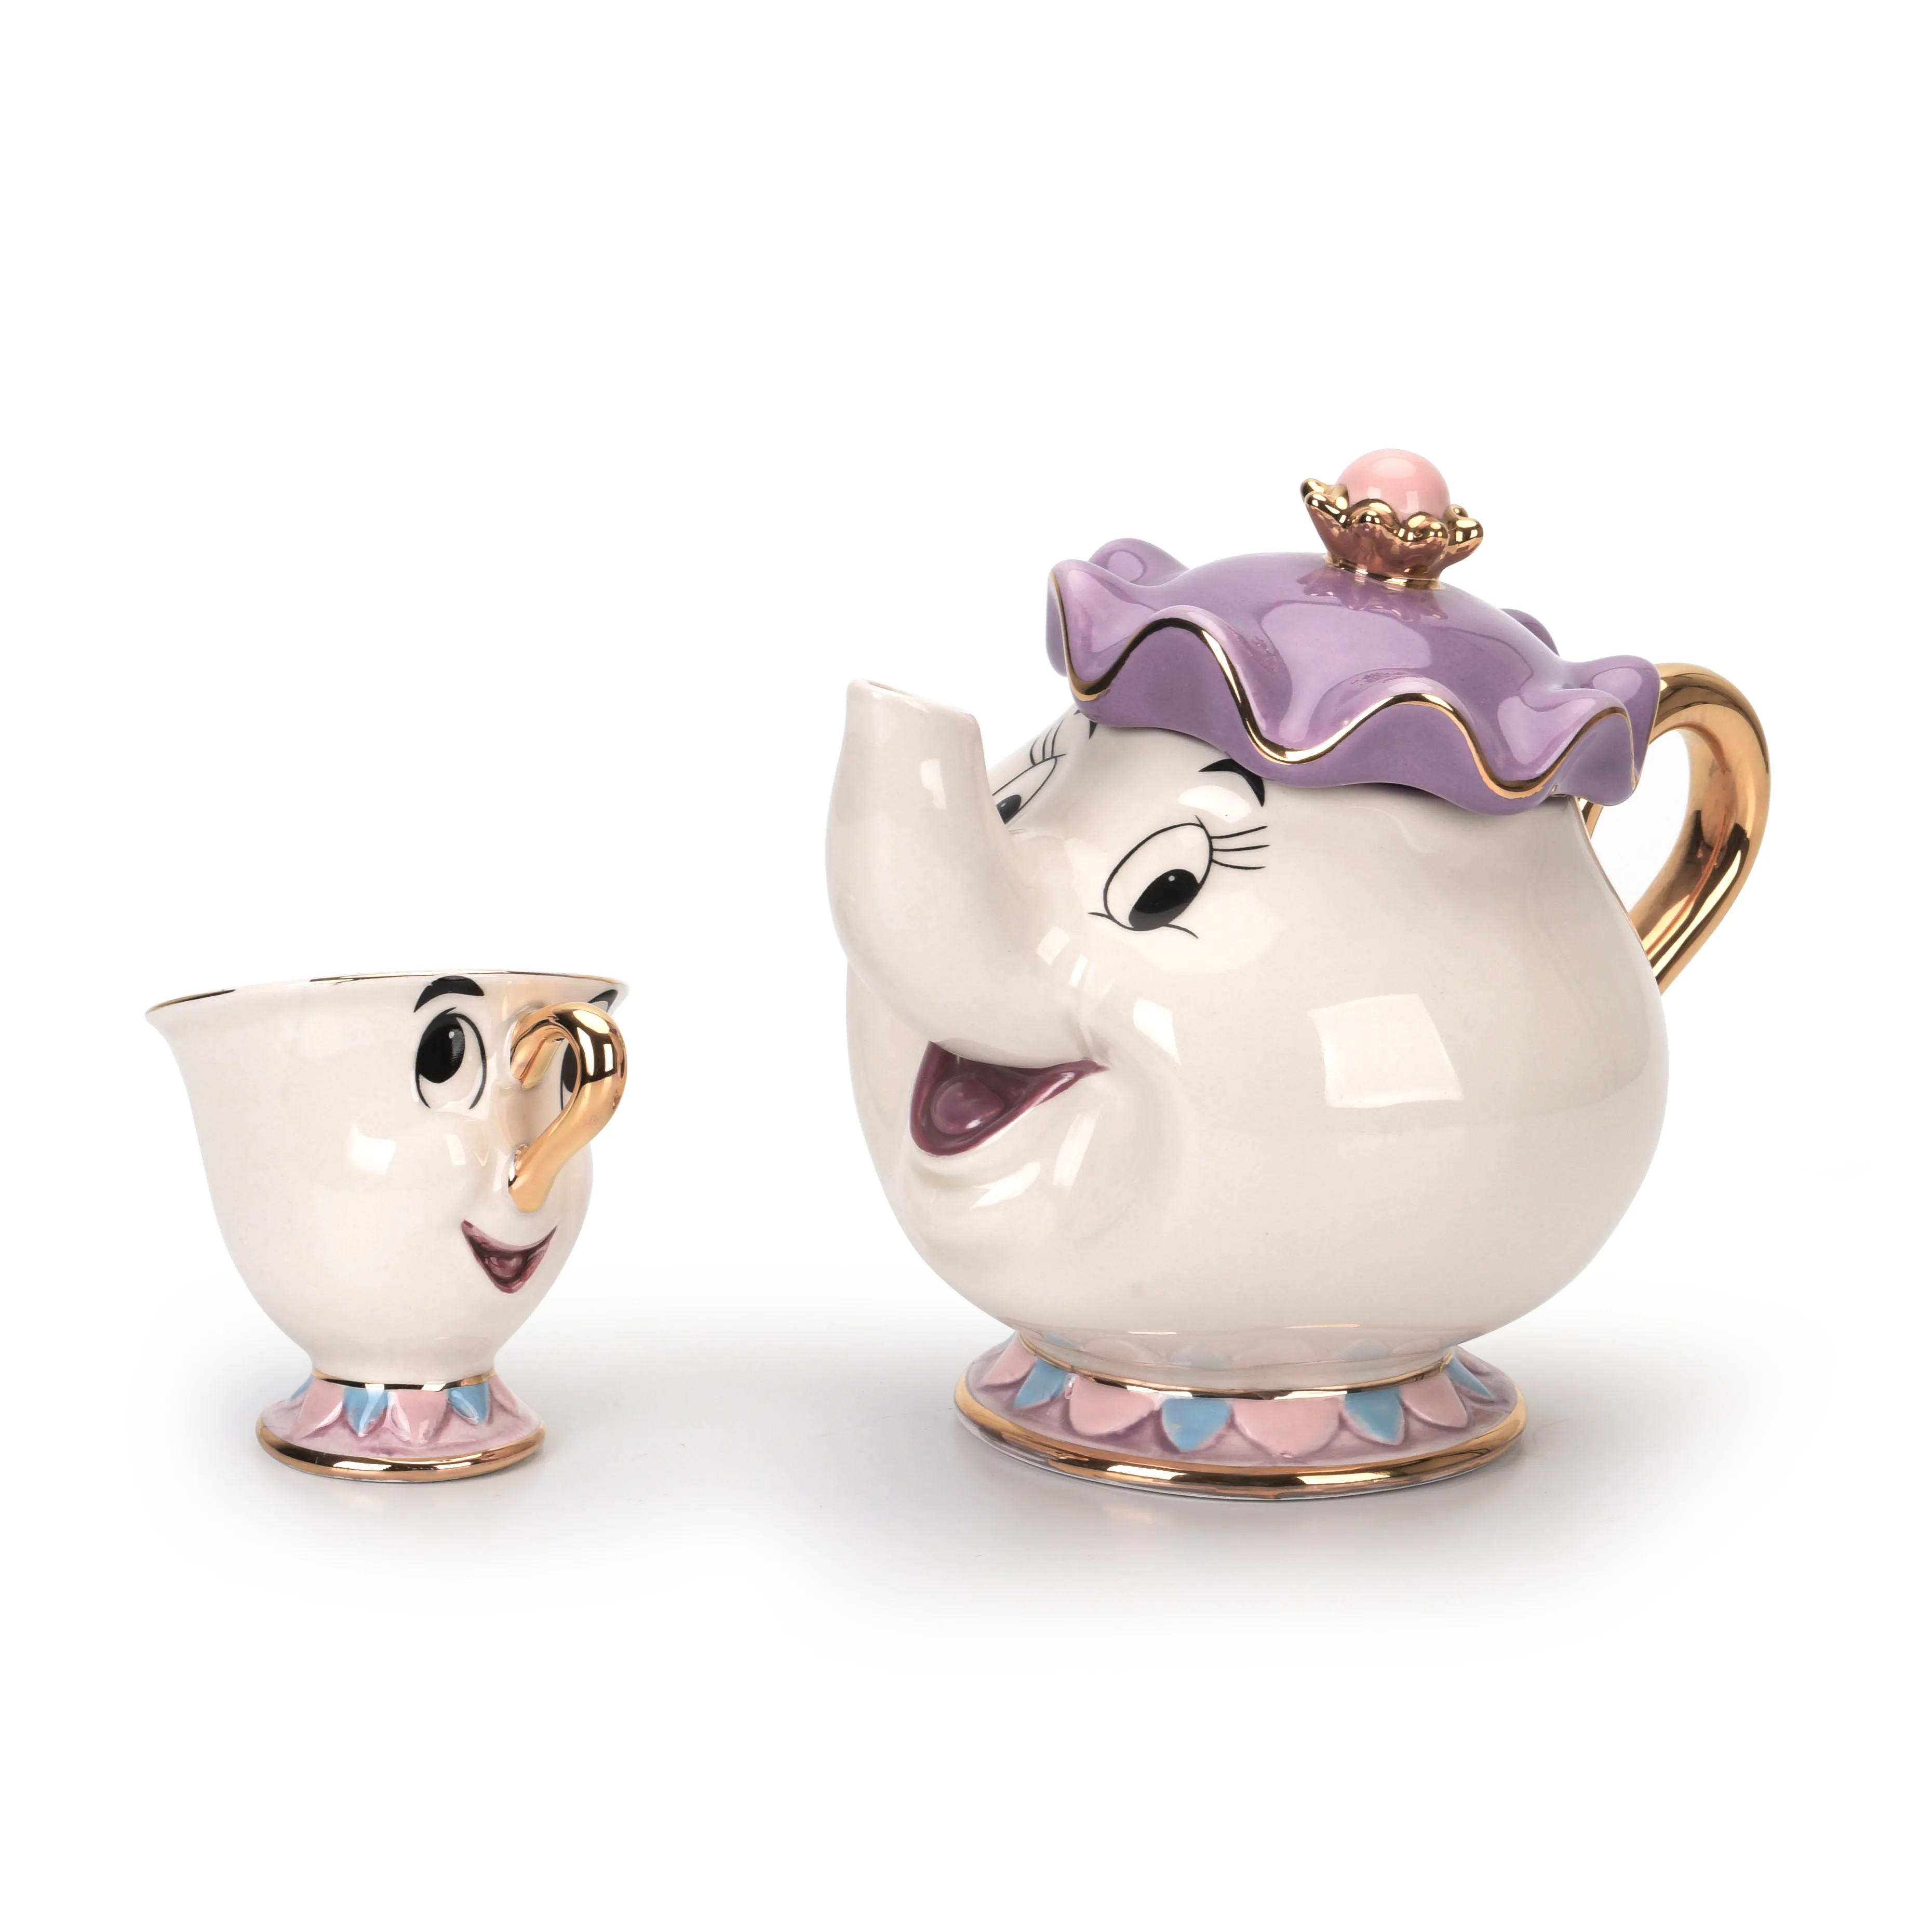 

Hot Sale Beauty And The Beast Tea Set Mrs Potts Teapot Chip Cup Sugar Bowl Pot Cup Set Cogsworth Clock Lovely Birthday Xmas Gift